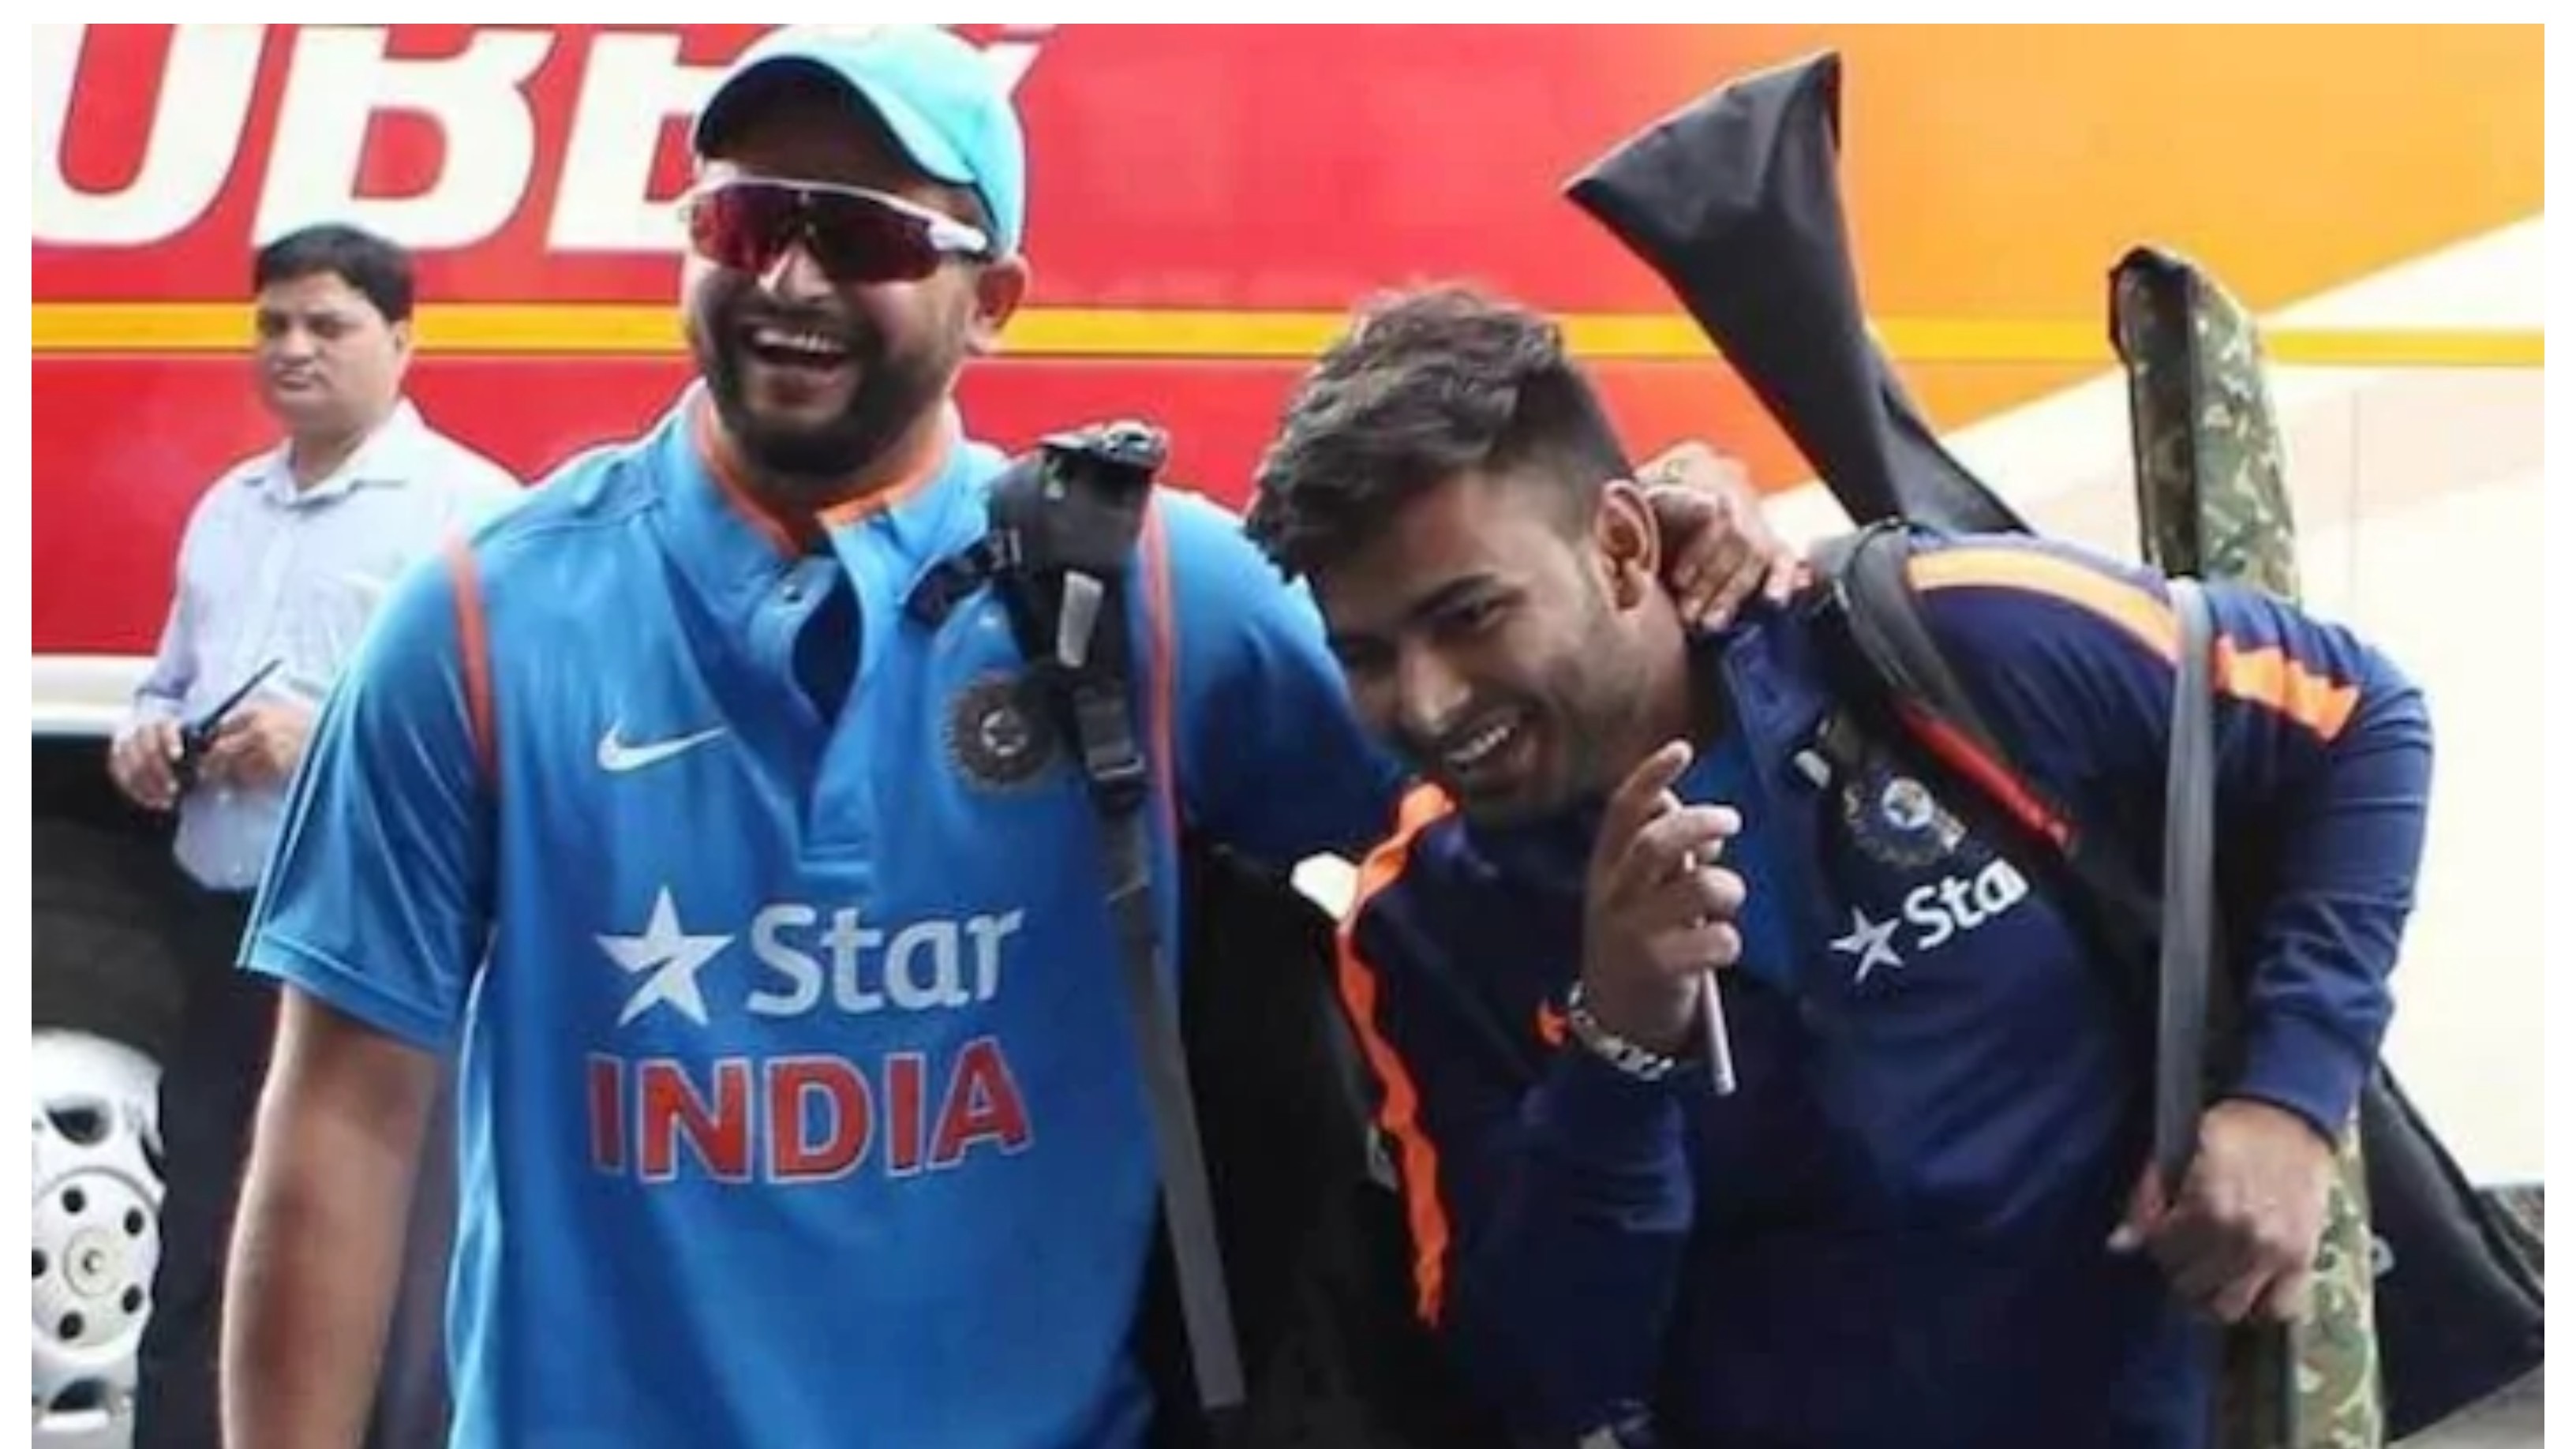 Suresh Raina terms Rishabh Pant as gun player, says he needs to be looked after by his teammates